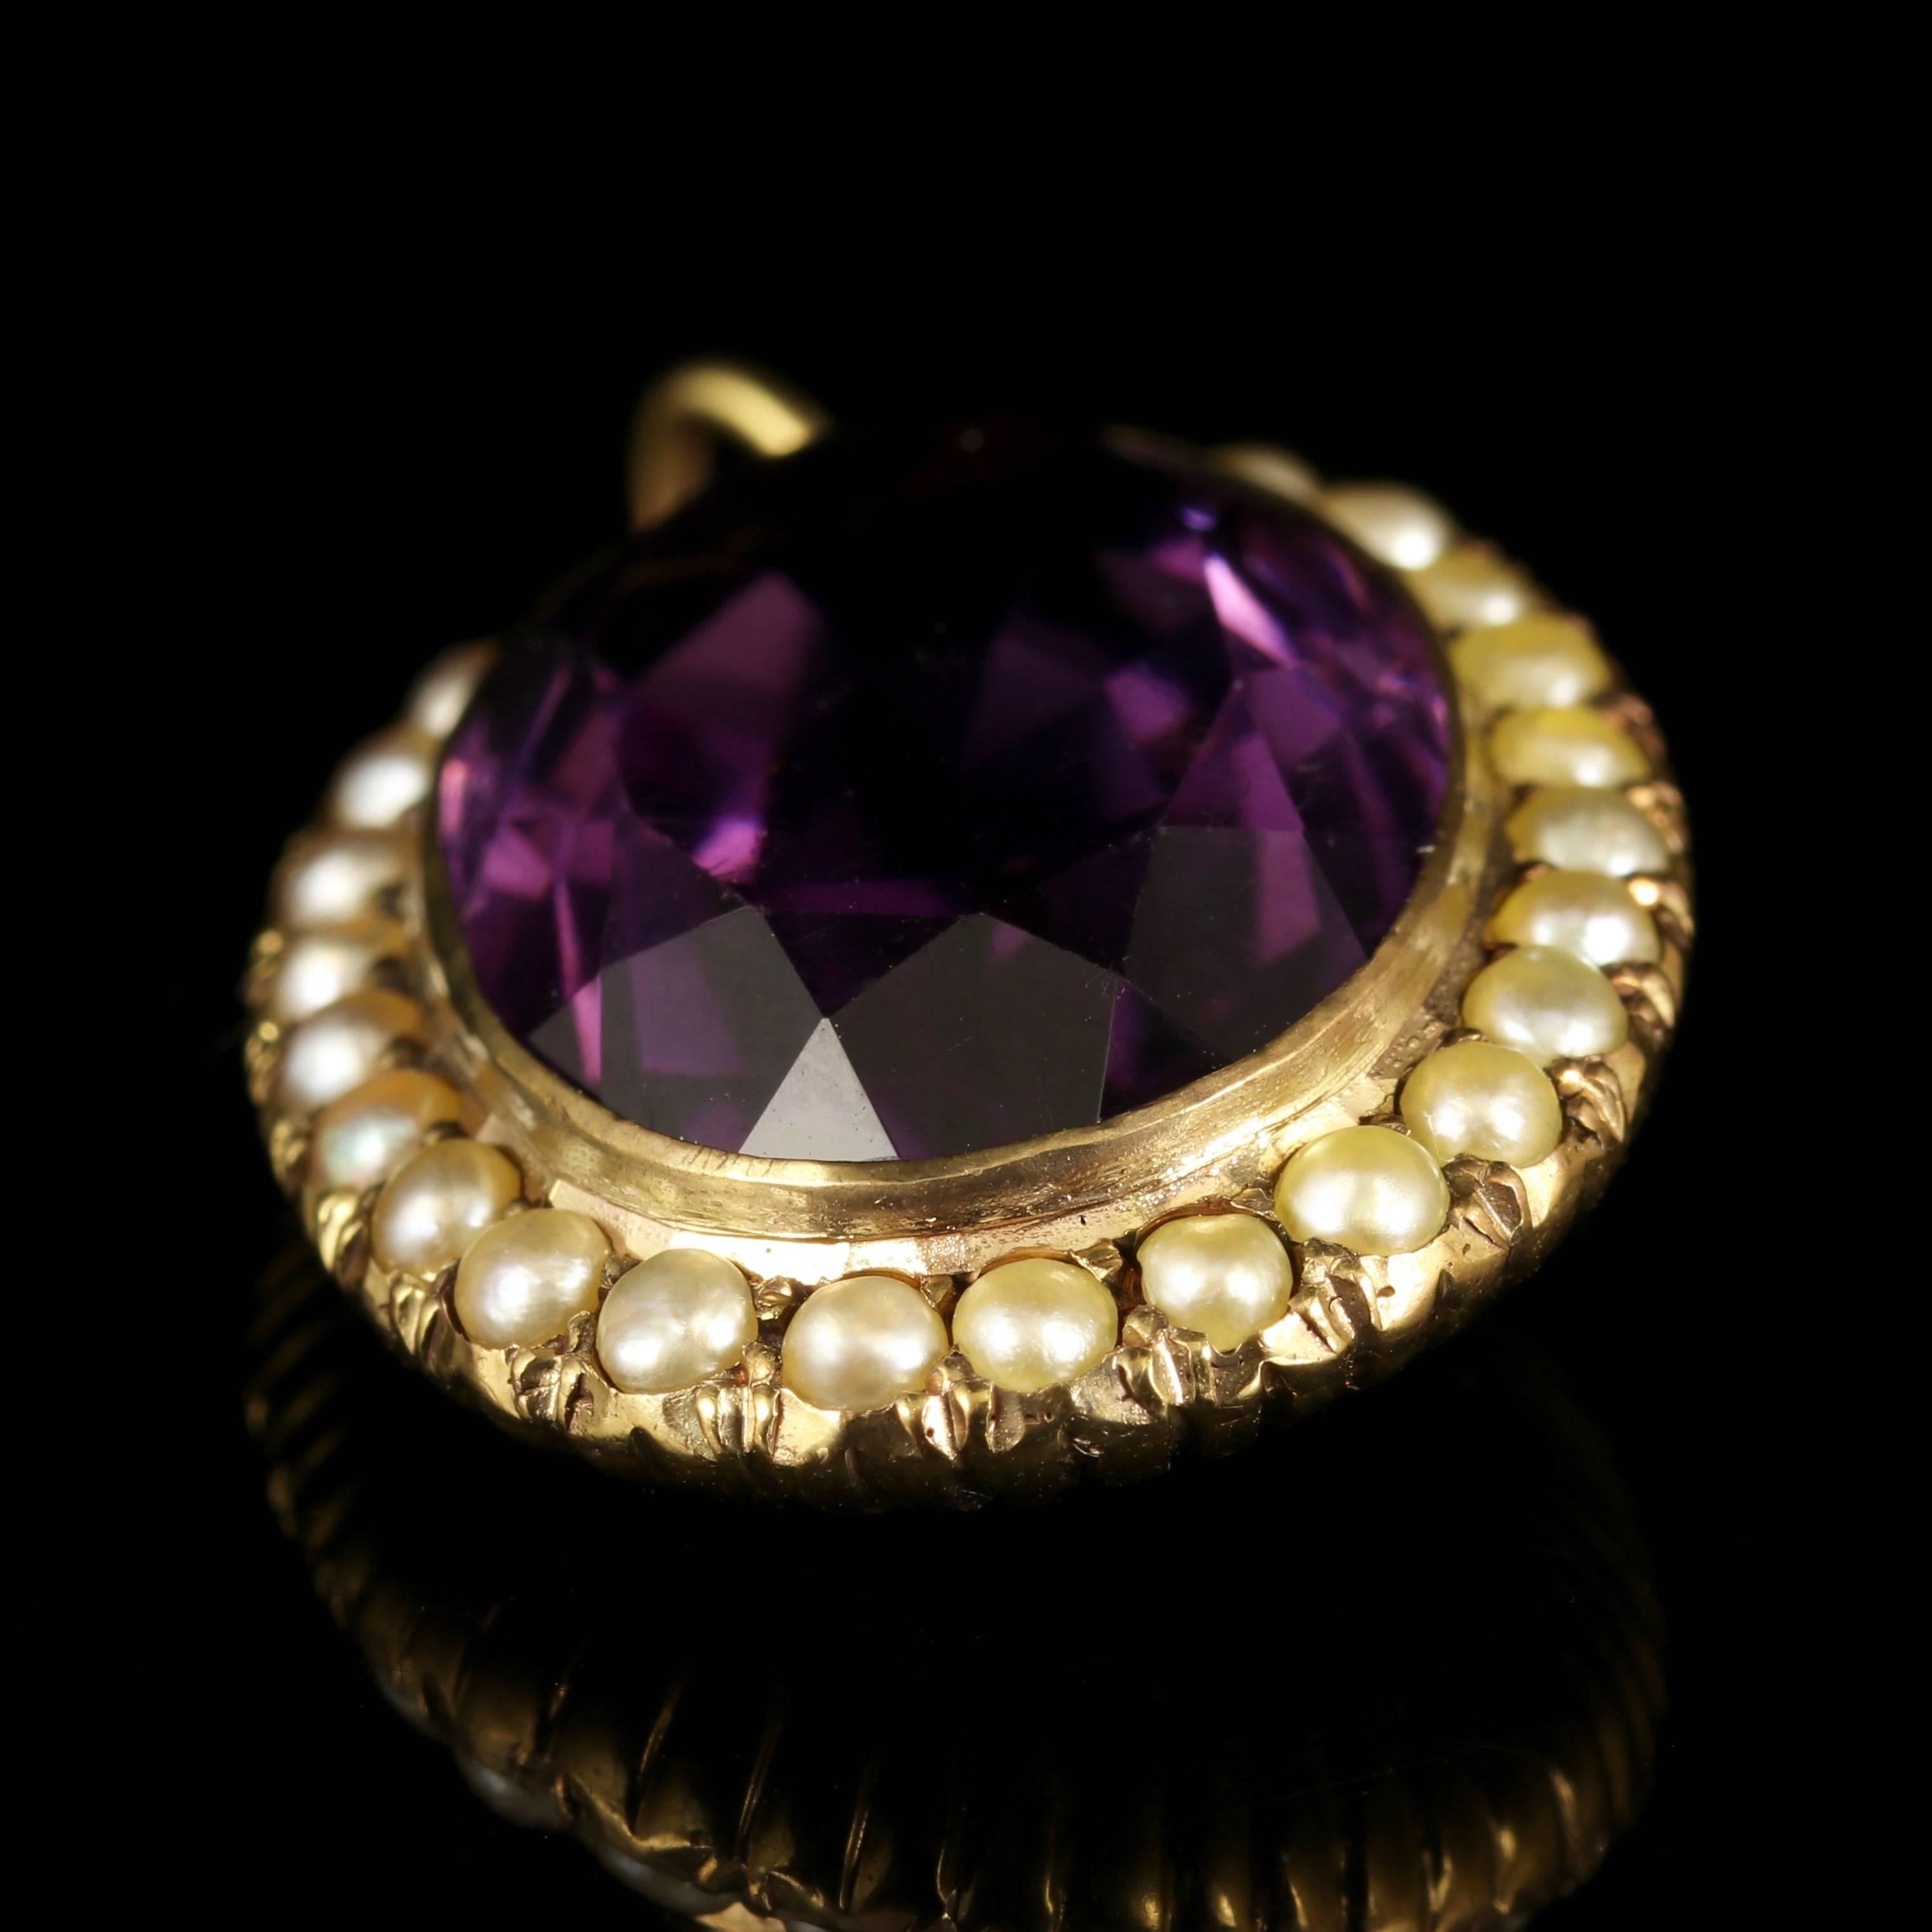 This fabulous antique Victorian pendant is set with a large deep purple Amethyst surrounded by a halo of Pearls.

Amethyst has been highly esteemed throughout the ages for its stunning beauty and legendary powers to stimulate, and soothe, the mind